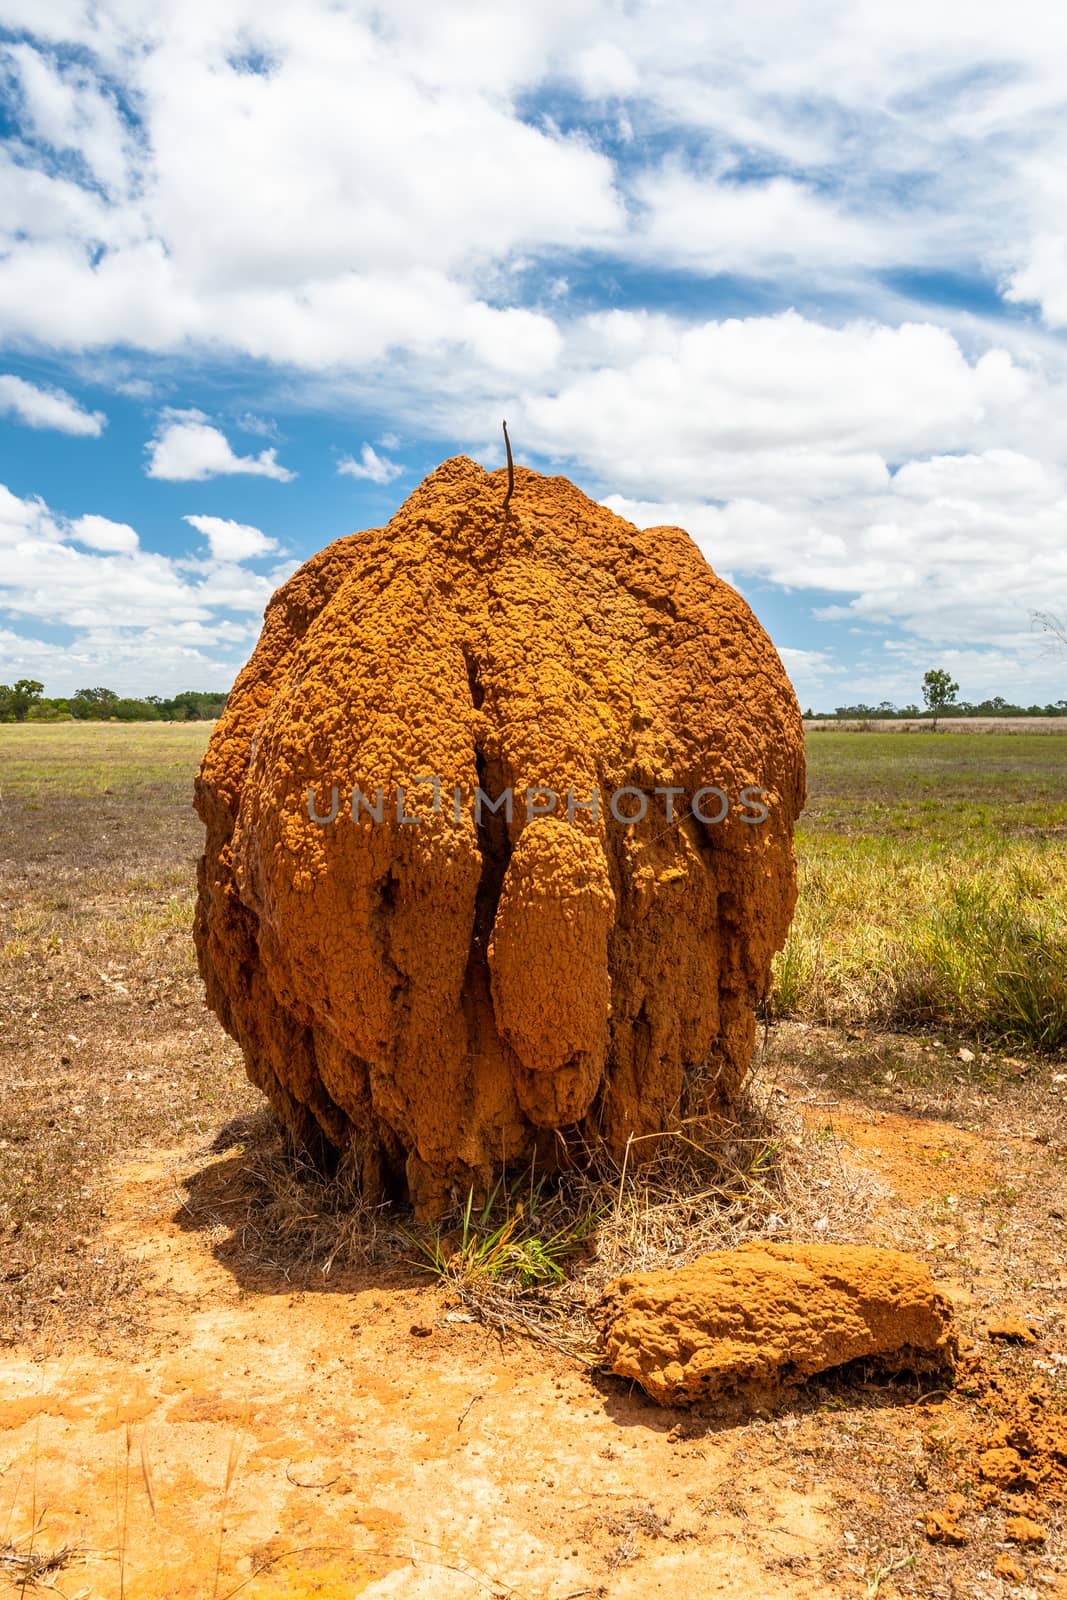 Isolated large termite mould in Queensland outback, Australia by mauricallari